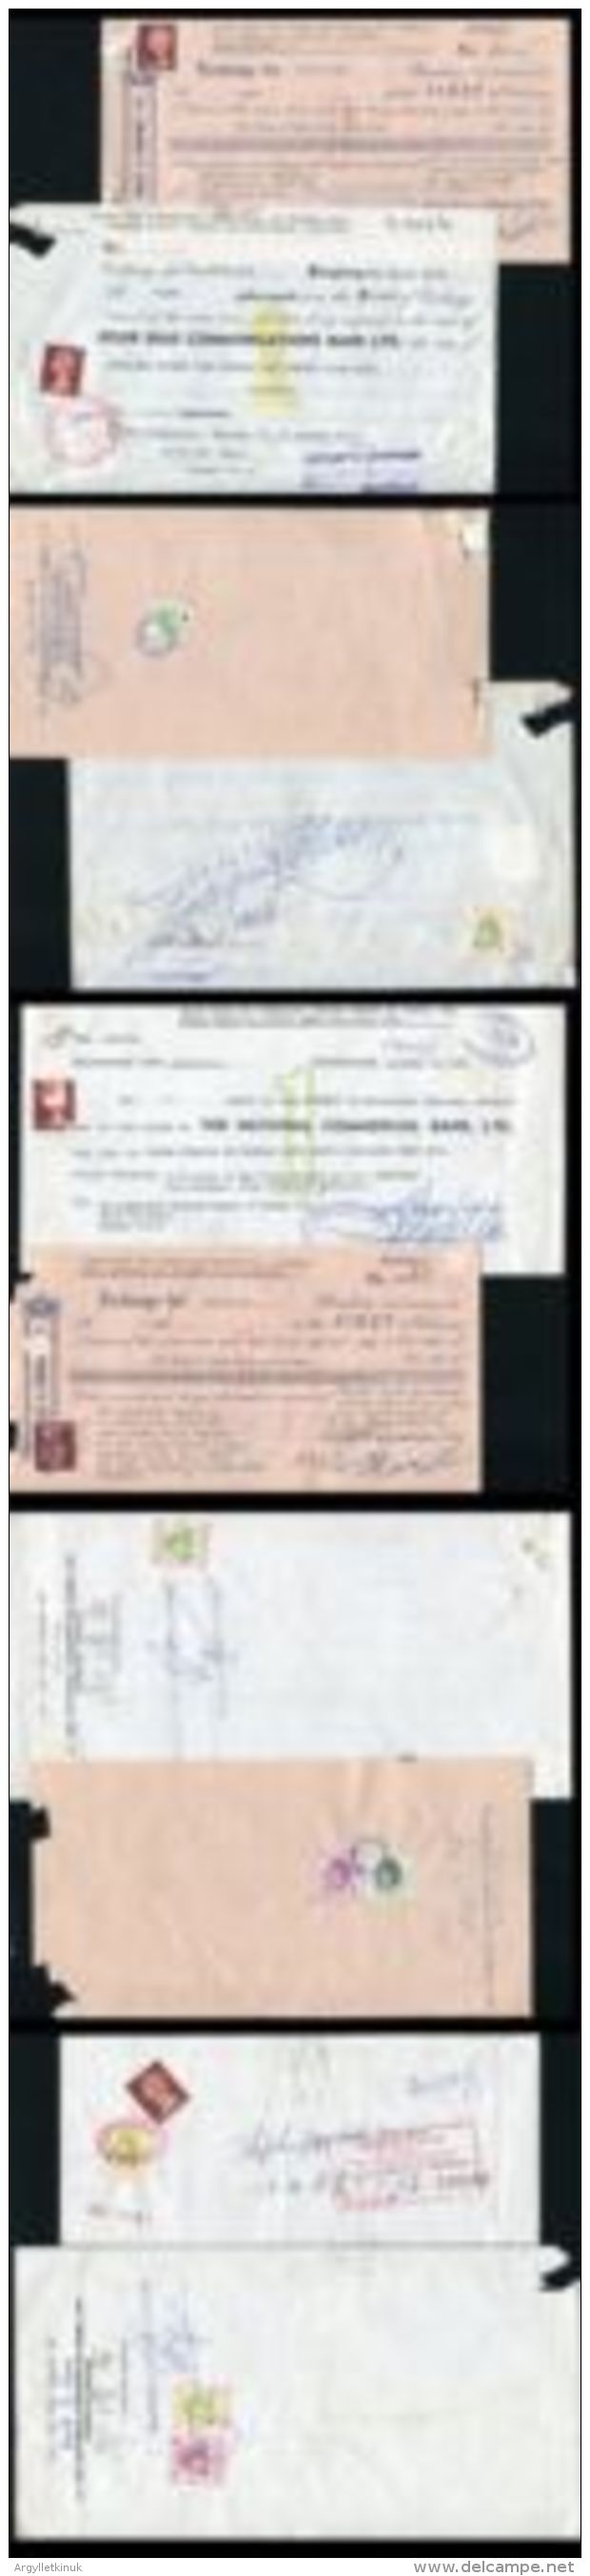 HONG KONG / GB/ AUSTRALIA CHEQUES 1968/9 - Cheques & Traveler's Cheques